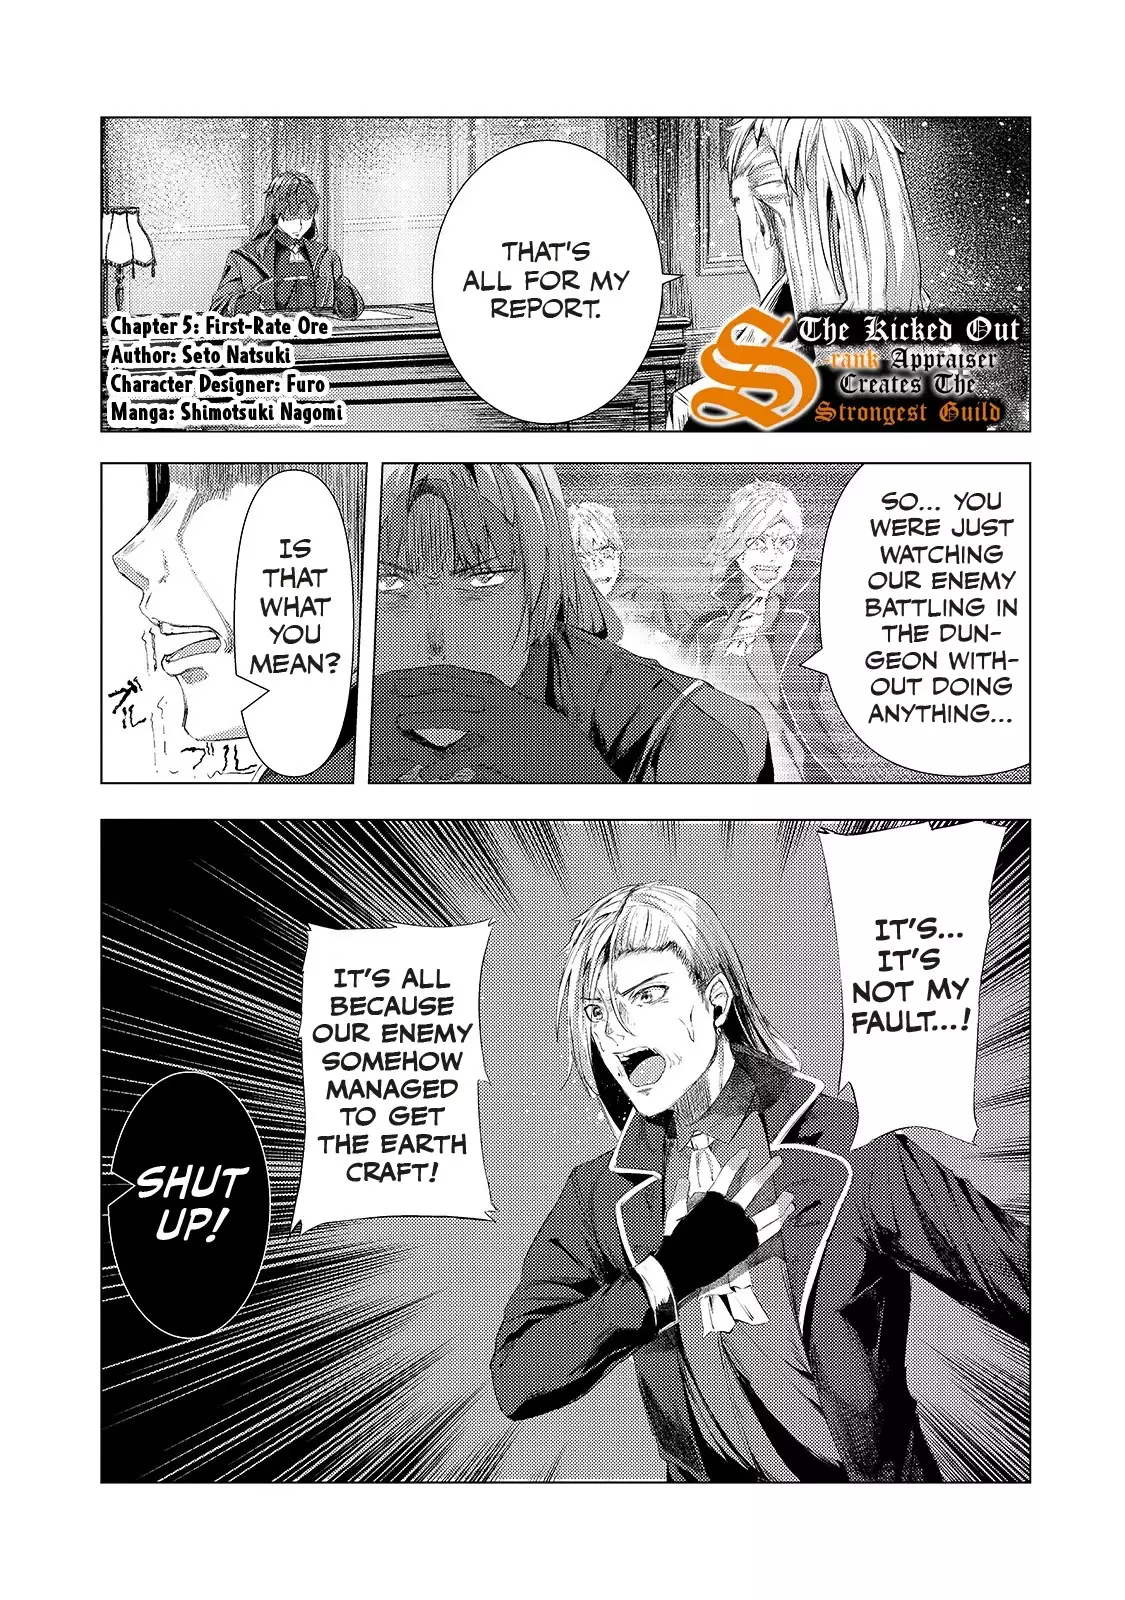 The Kicked Out S-Rank Appraiser Creates The Strongest Guild - 5 page 2-3ae844fe